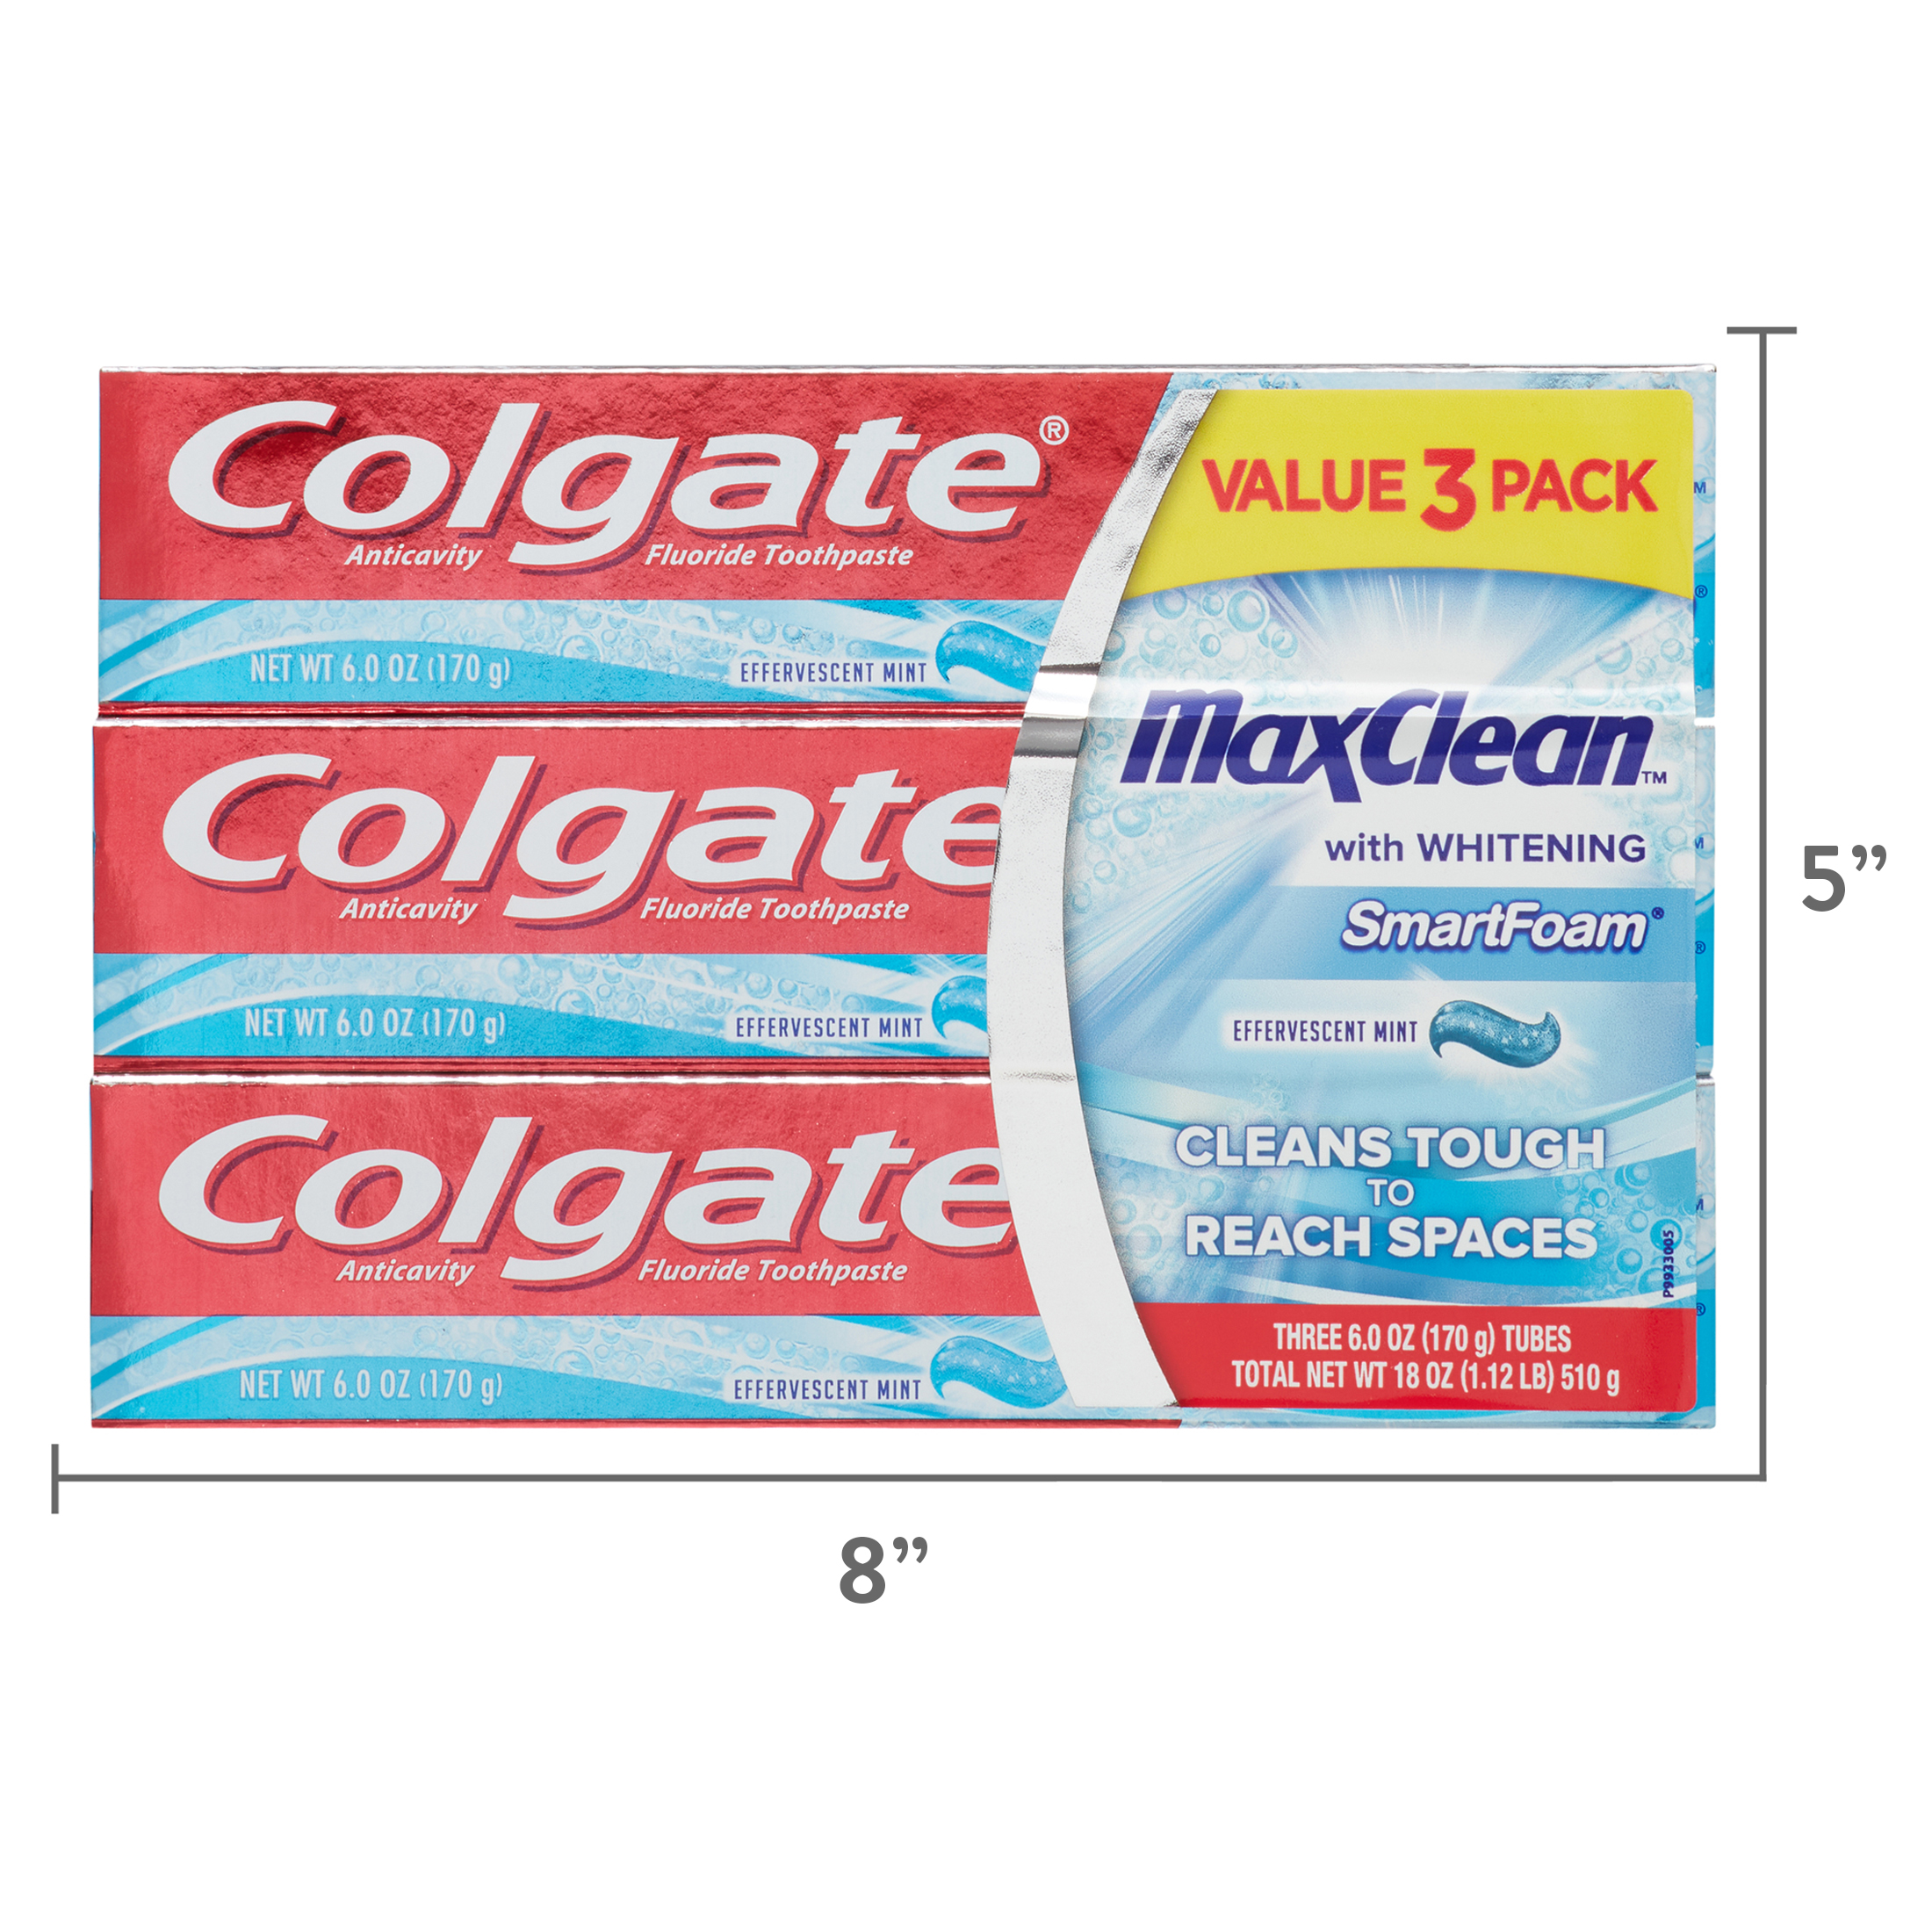 Colgate MaxClean SmartFoam Toothpaste Effervescent Mint - 6.0 Ounce (3 Pack) - image 4 of 12